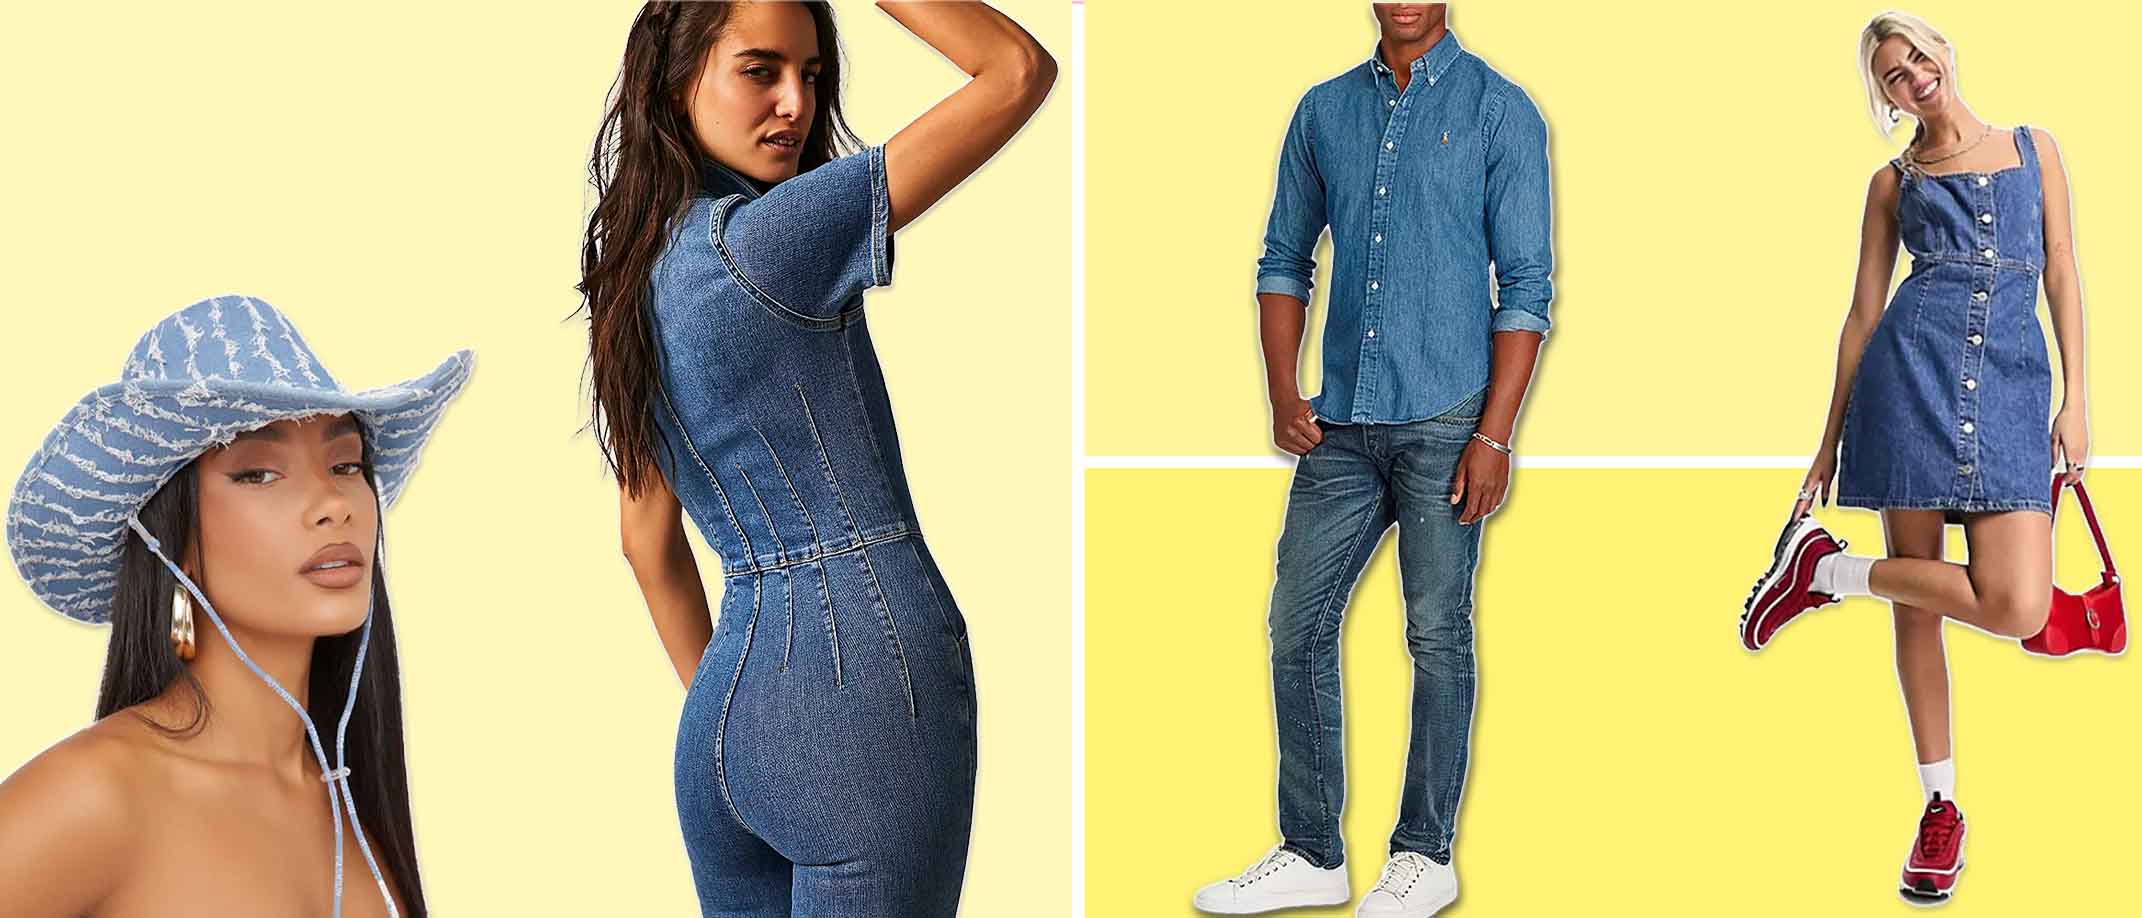 10 essentials for nailing double denim style - Daily Mail